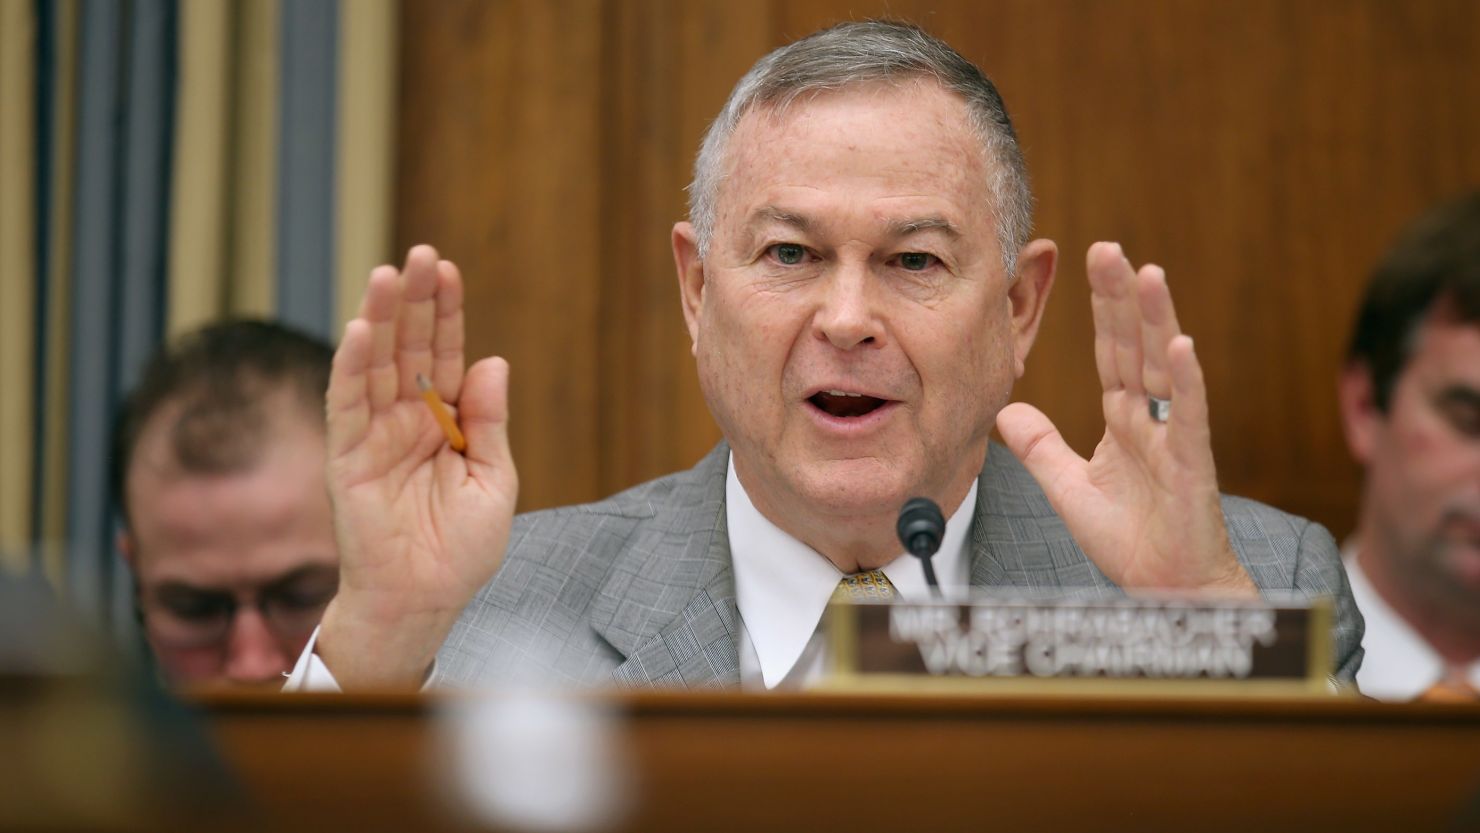 Rep. Dana Rohrabacher, R-California, questions witnesses from NASA, the Department of Defense and the White House during a hearing in the Rayburn House Office Building on Capitol Hill March 19, 2013 in Washington.